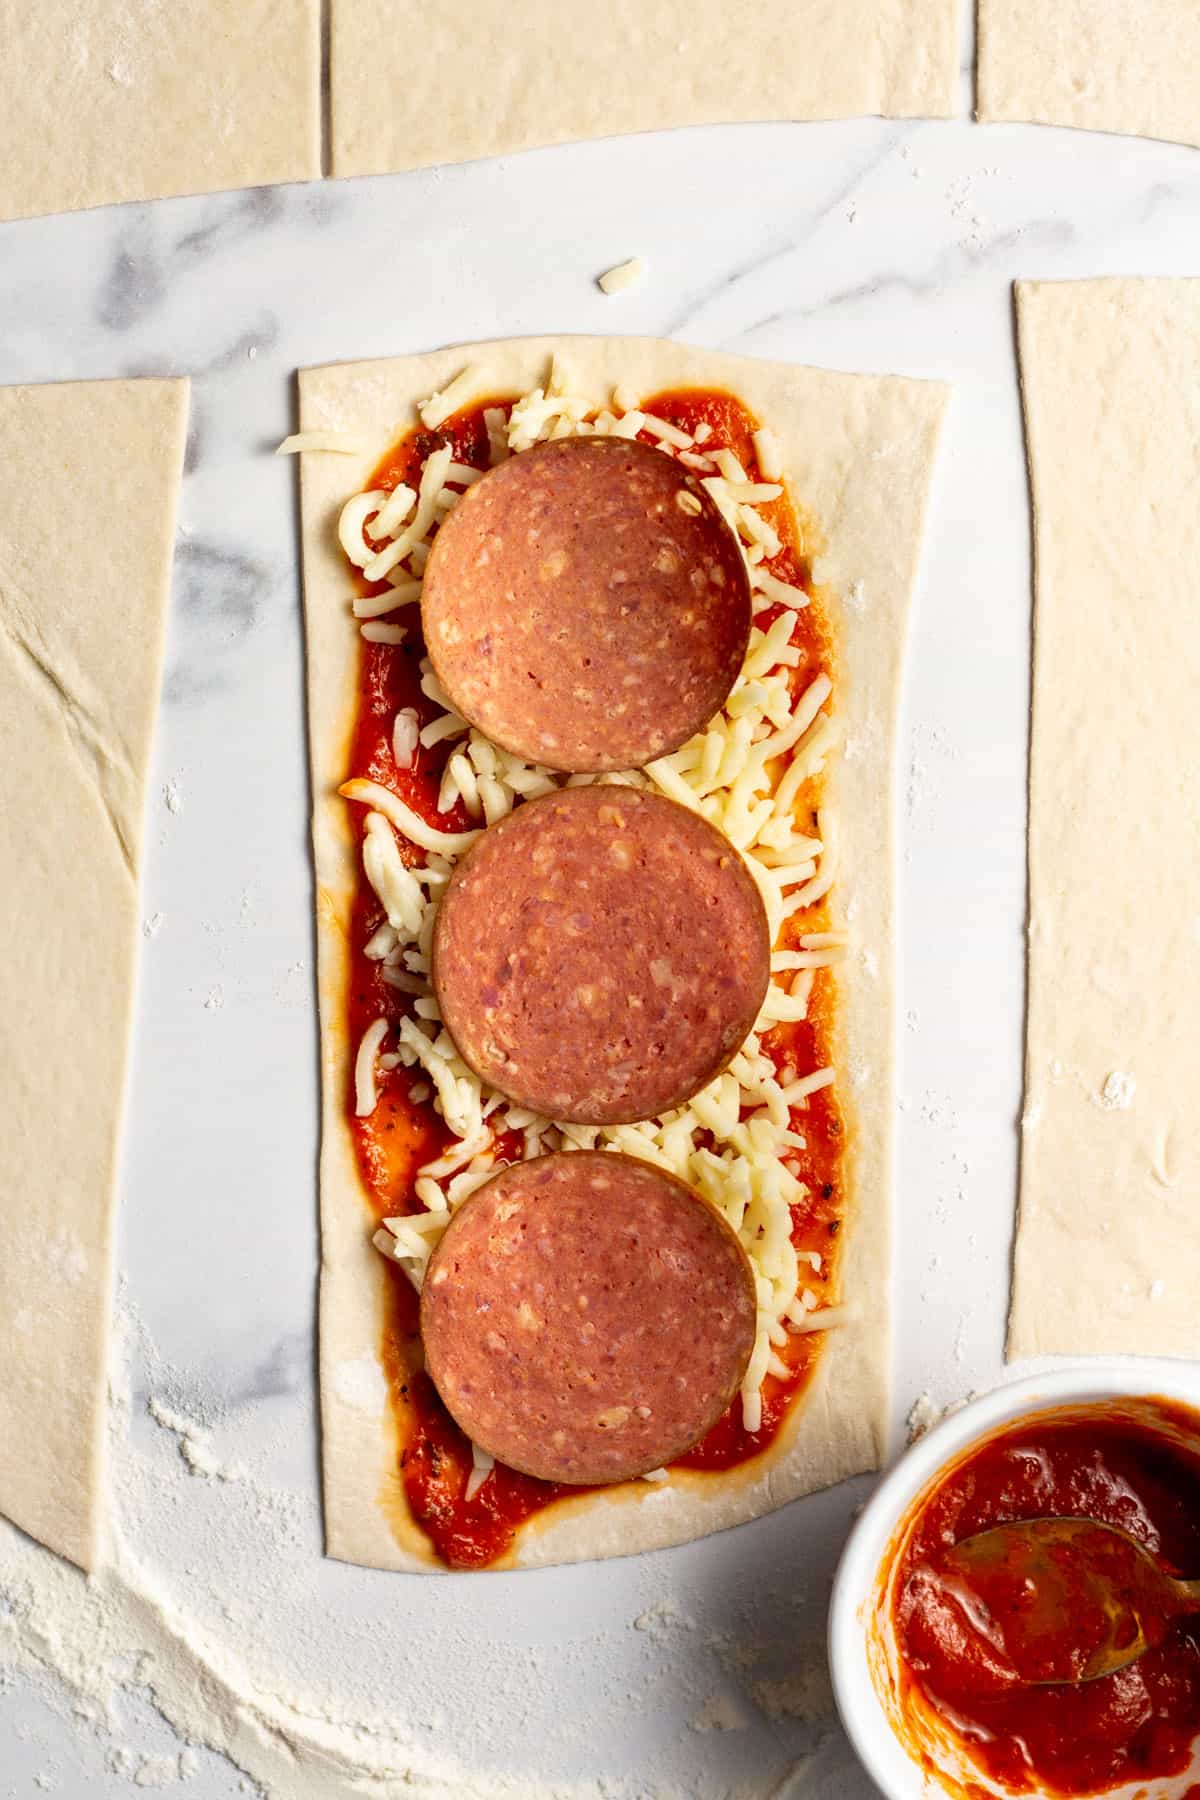 pizza dough cut into rectangles and topped with pepperoni, sauce and mozzarella cheese